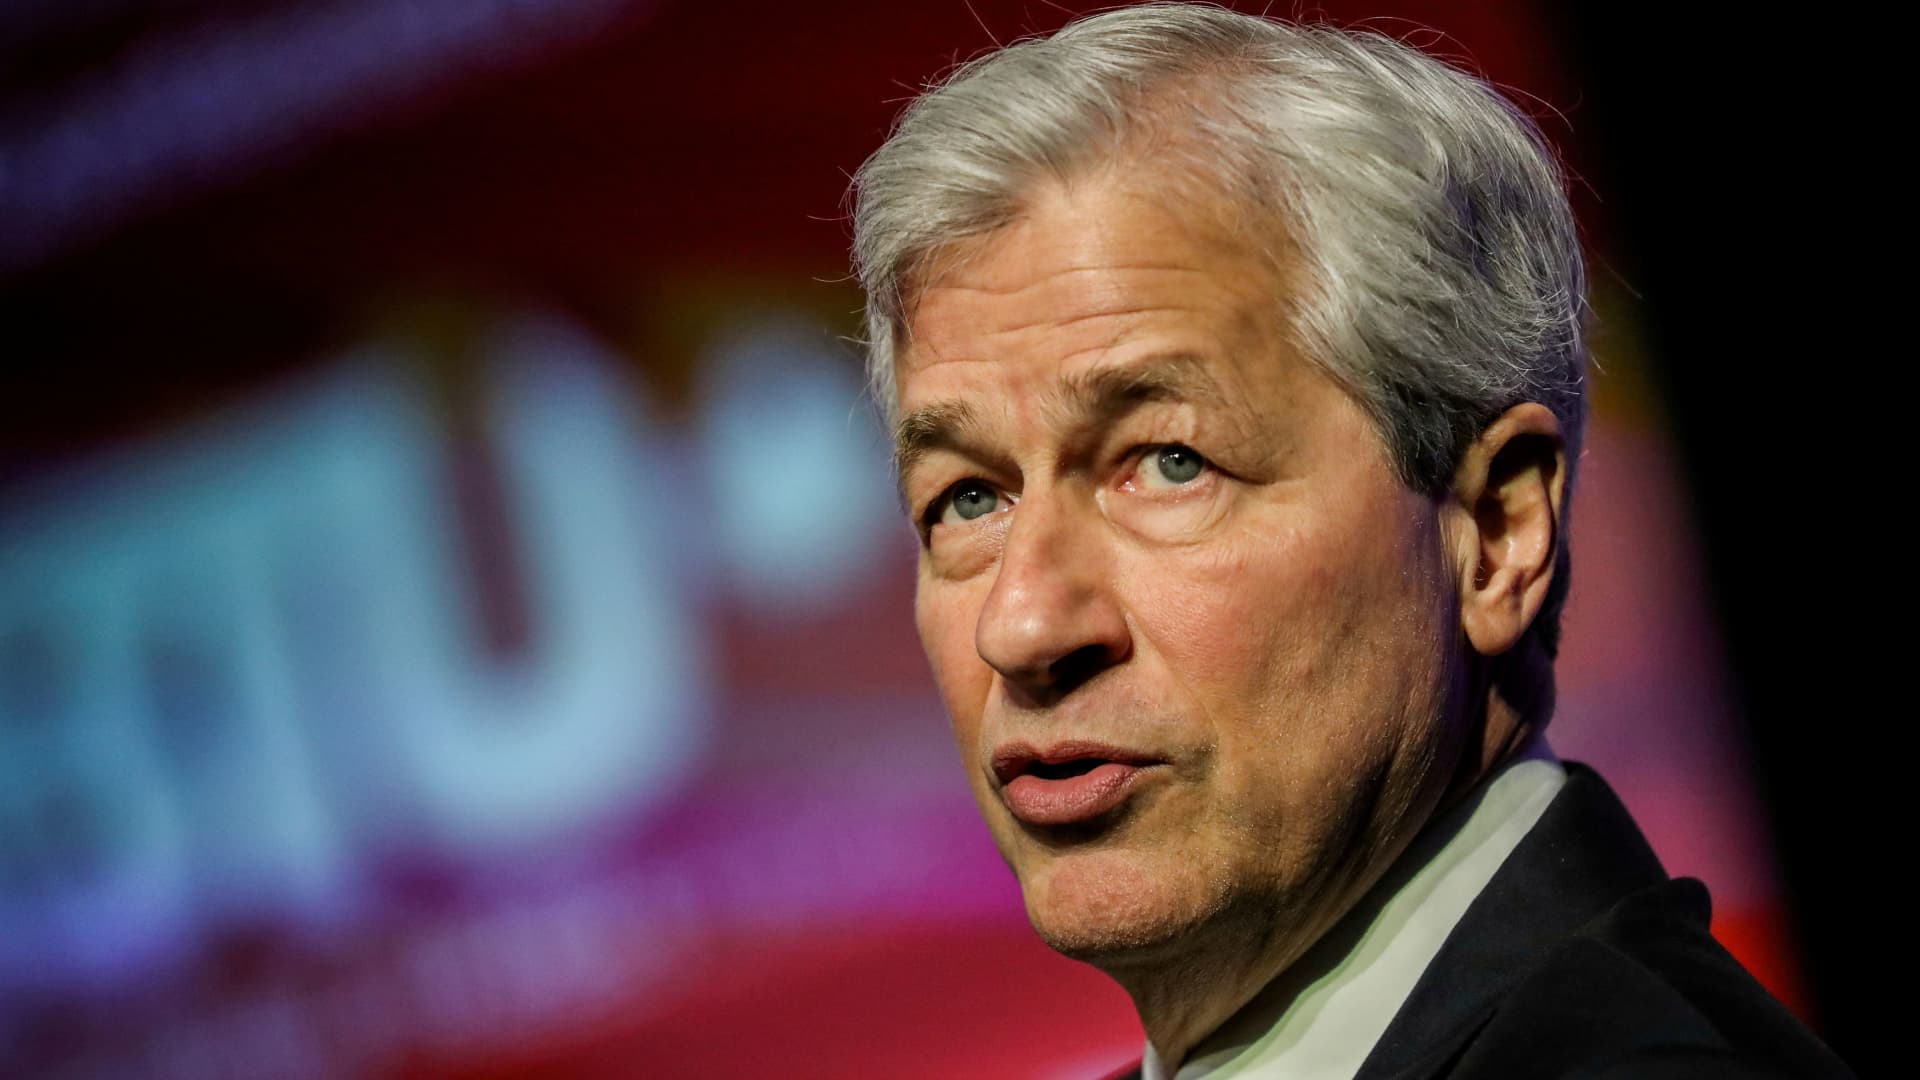 Dimon calls crypto a 'complete sideshow' and says tokens are 'pet rocks'